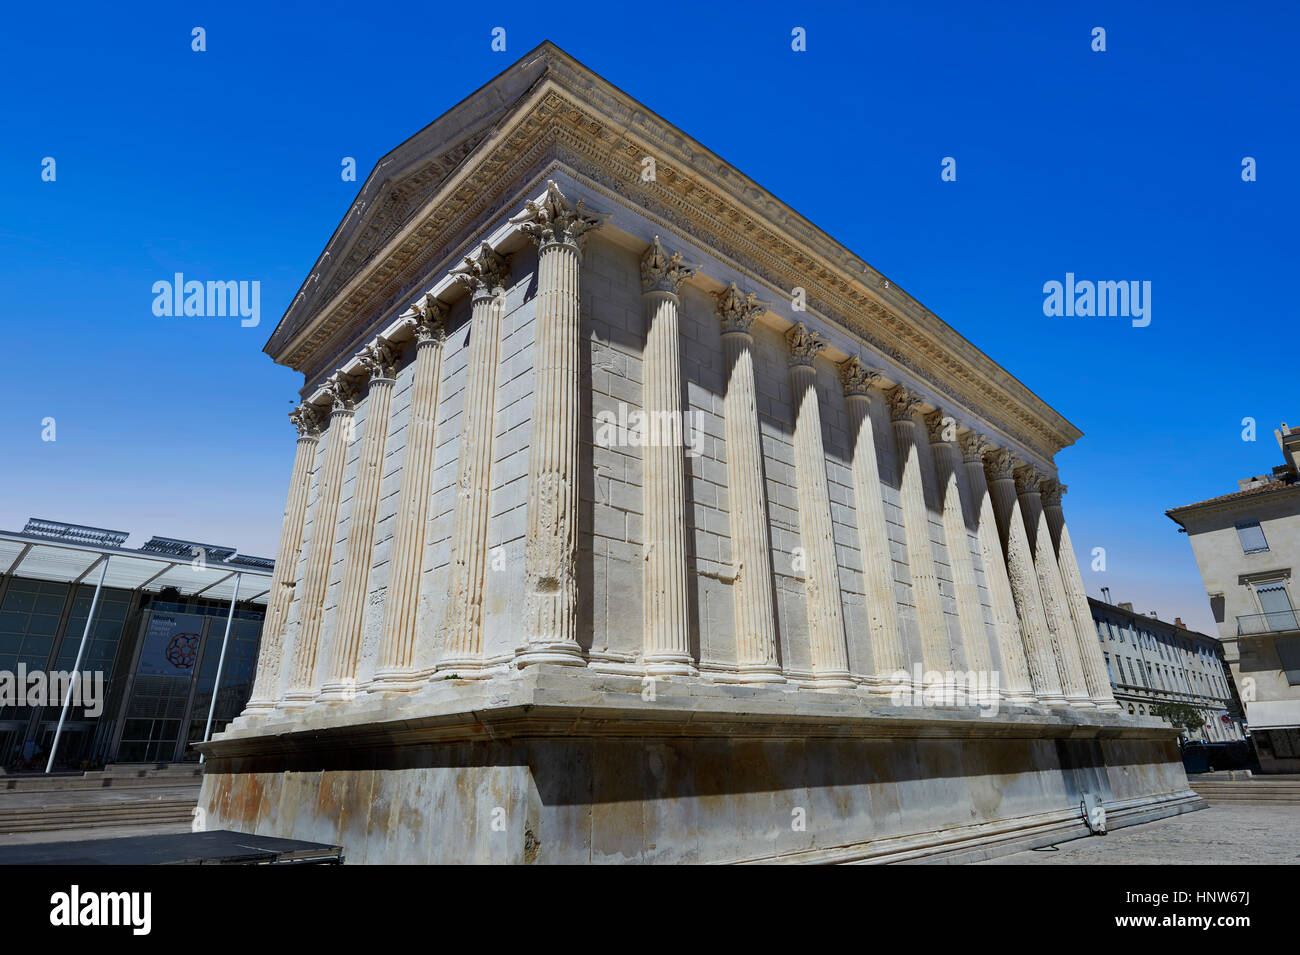 Maison Carrée, a ancient Roman temple built around 4-7 AD and dedicated to Julius Caesar, the best preserved example of a Roman temple,  Nimes, France Stock Photo